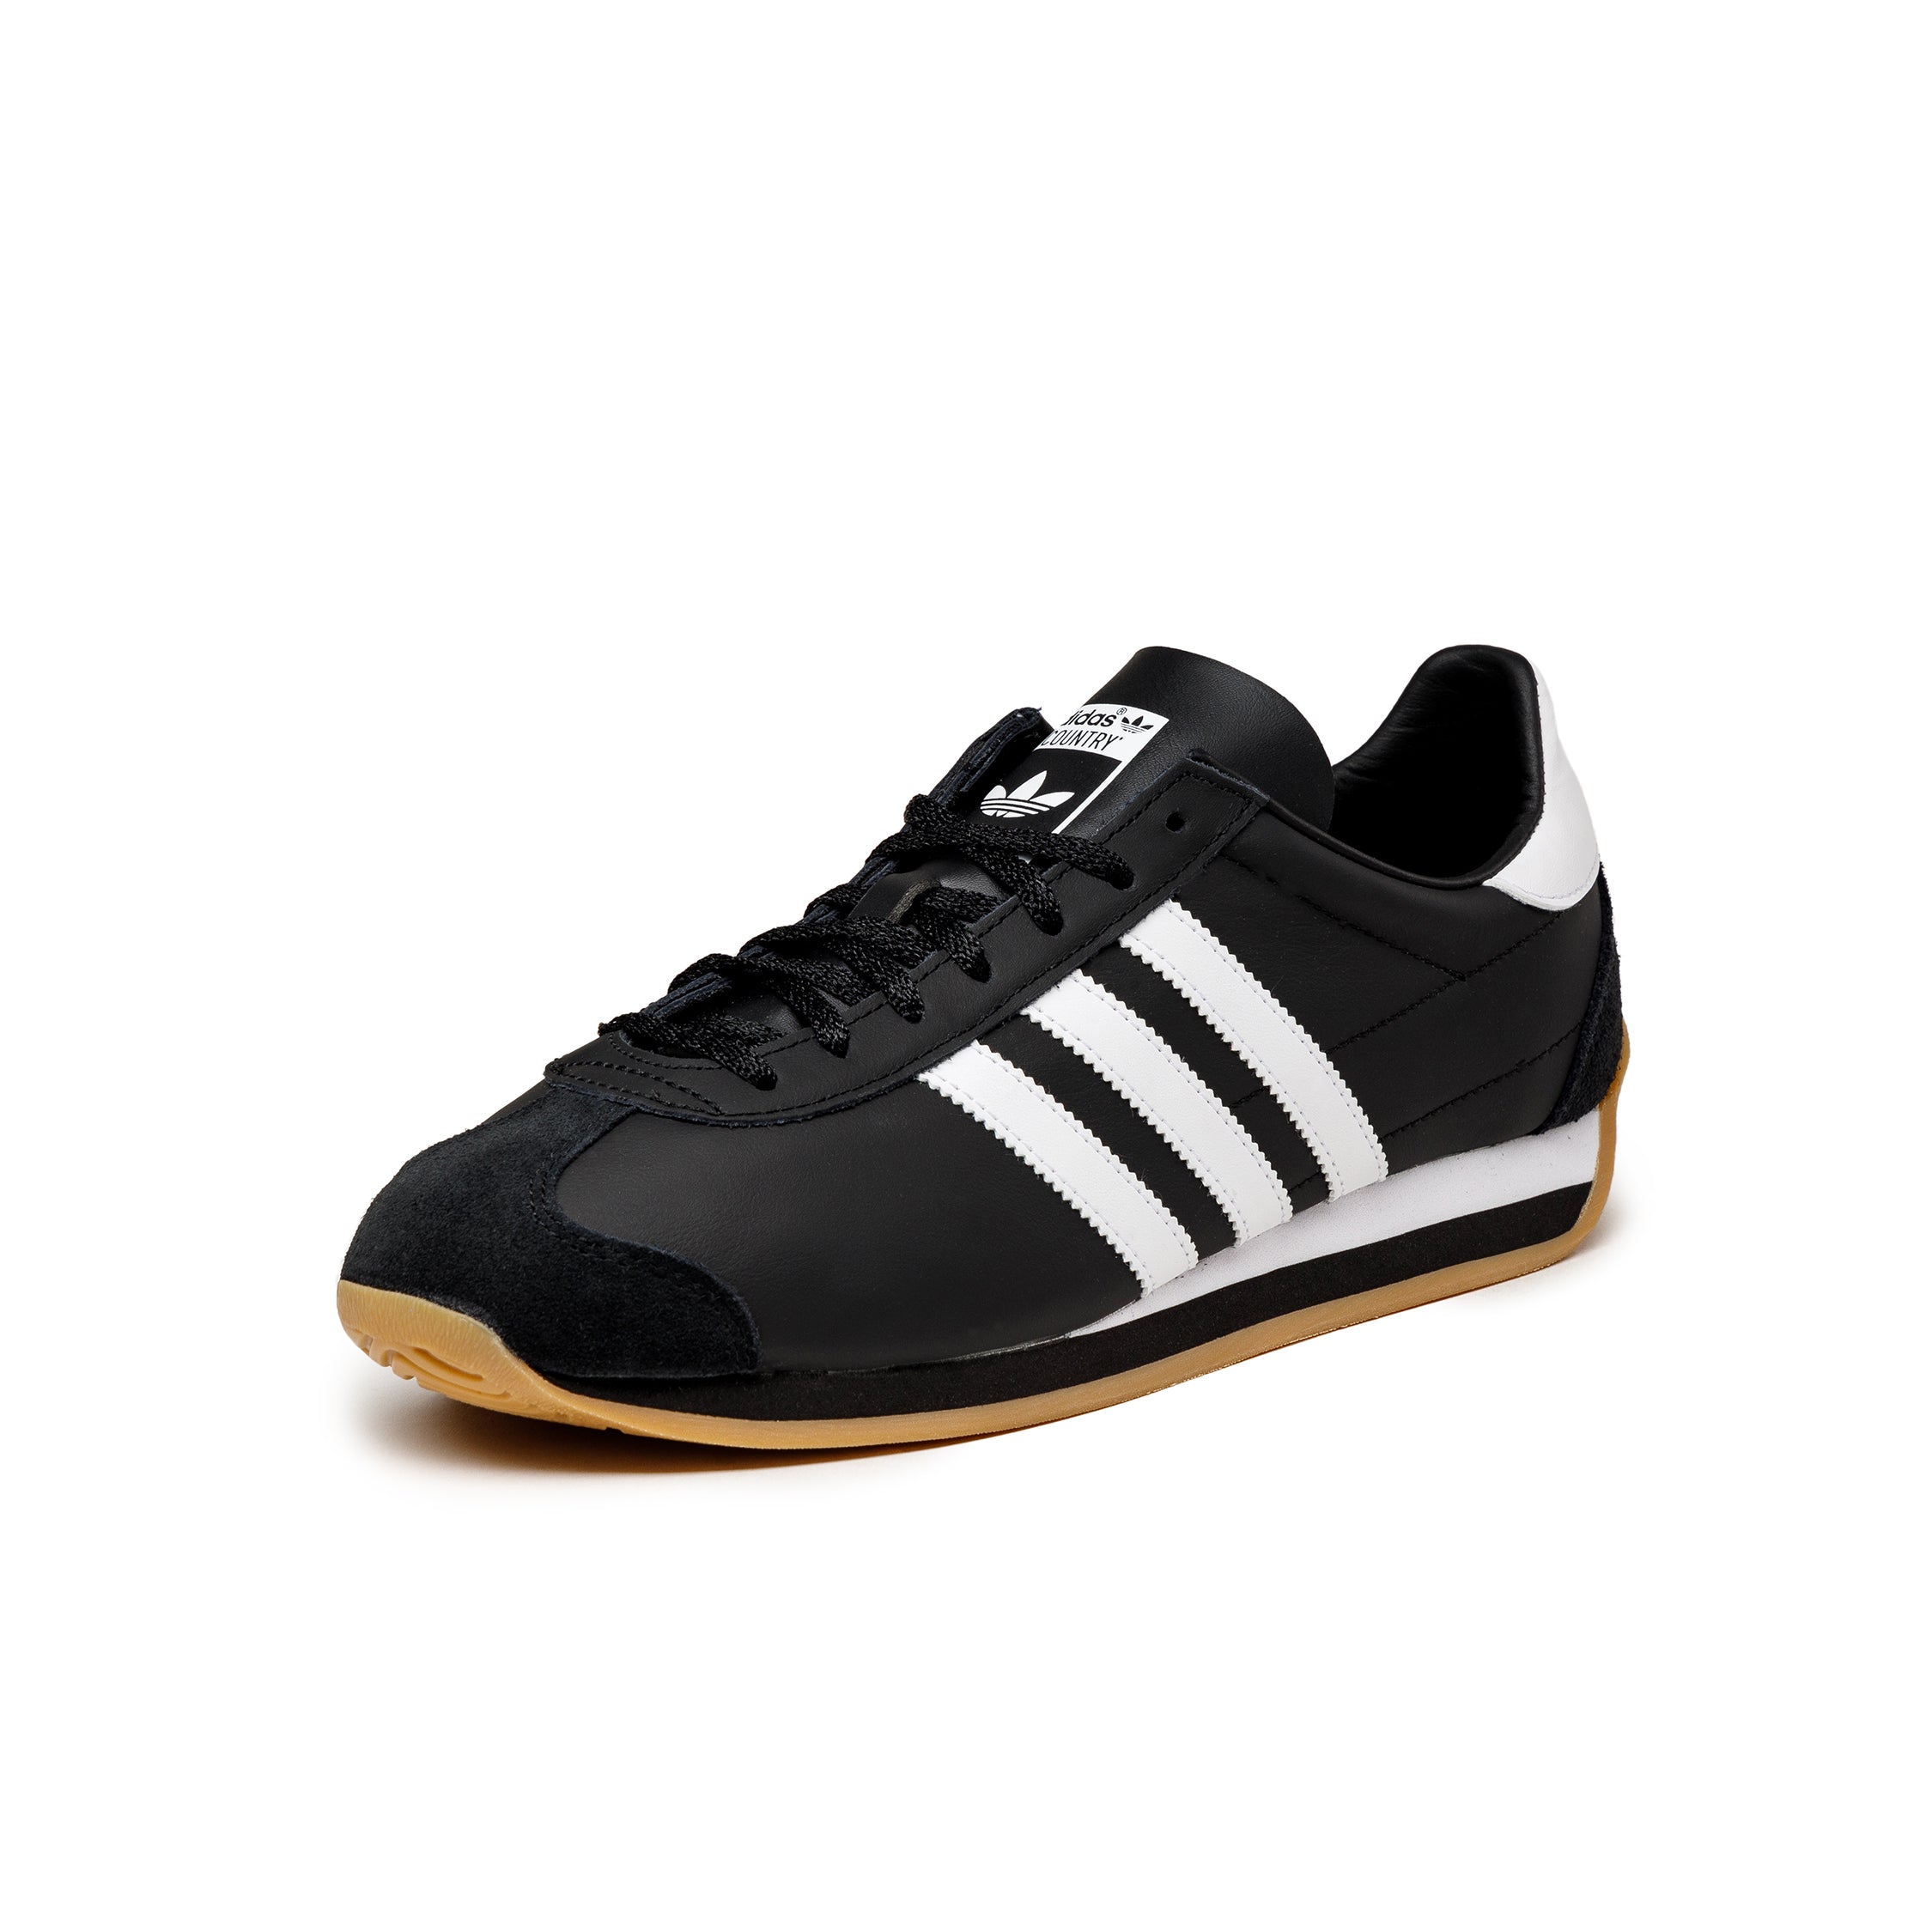 Adidas Country OG » Buy online now!